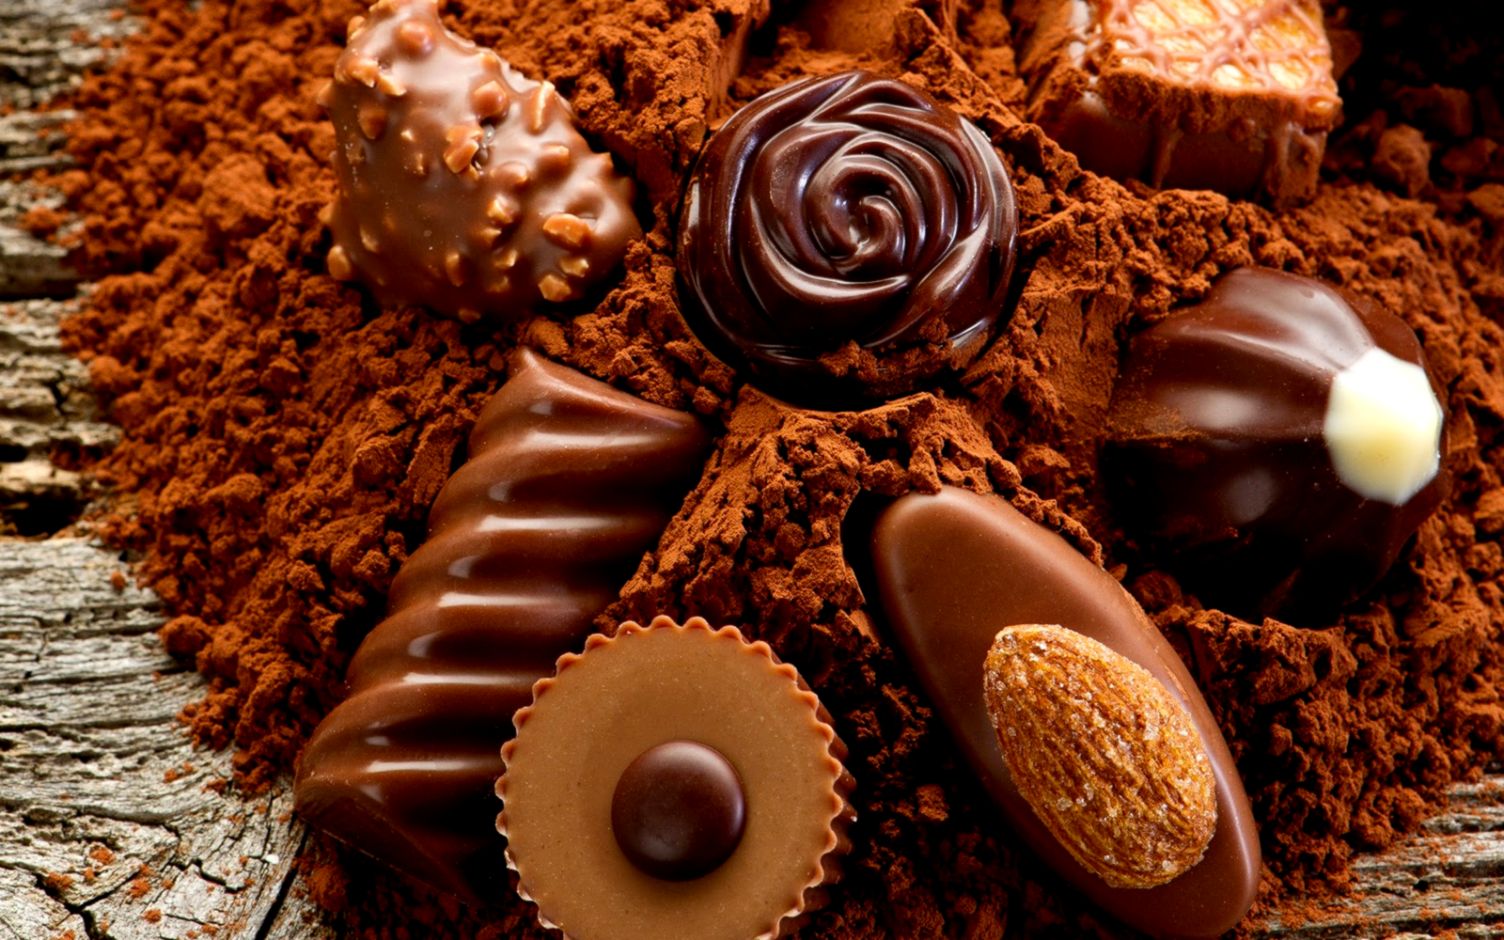 Chocolate Day Wallpapers 7 Qhd Wallpaper - Chocolate Template Free Power Point - HD Wallpaper 